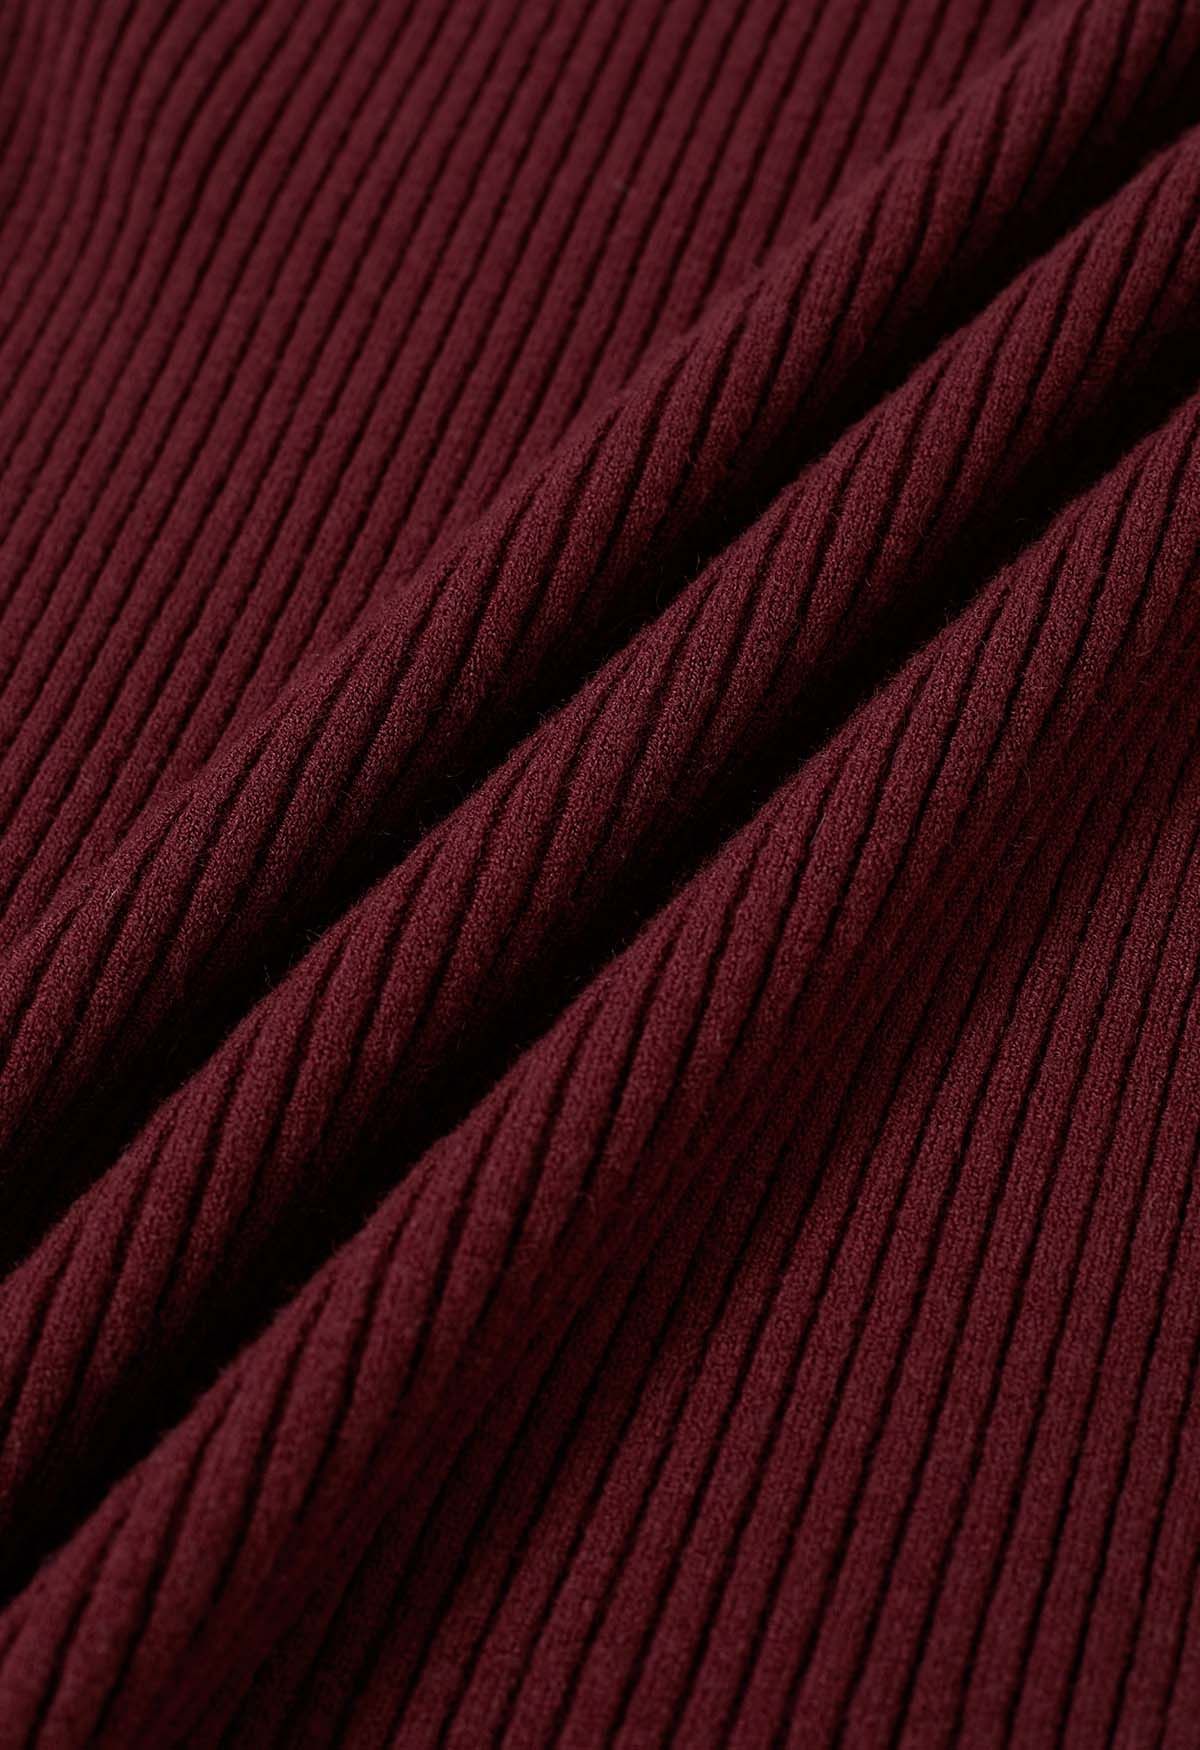 Turtleneck Ribbed Fitted Knit Top in Burgundy